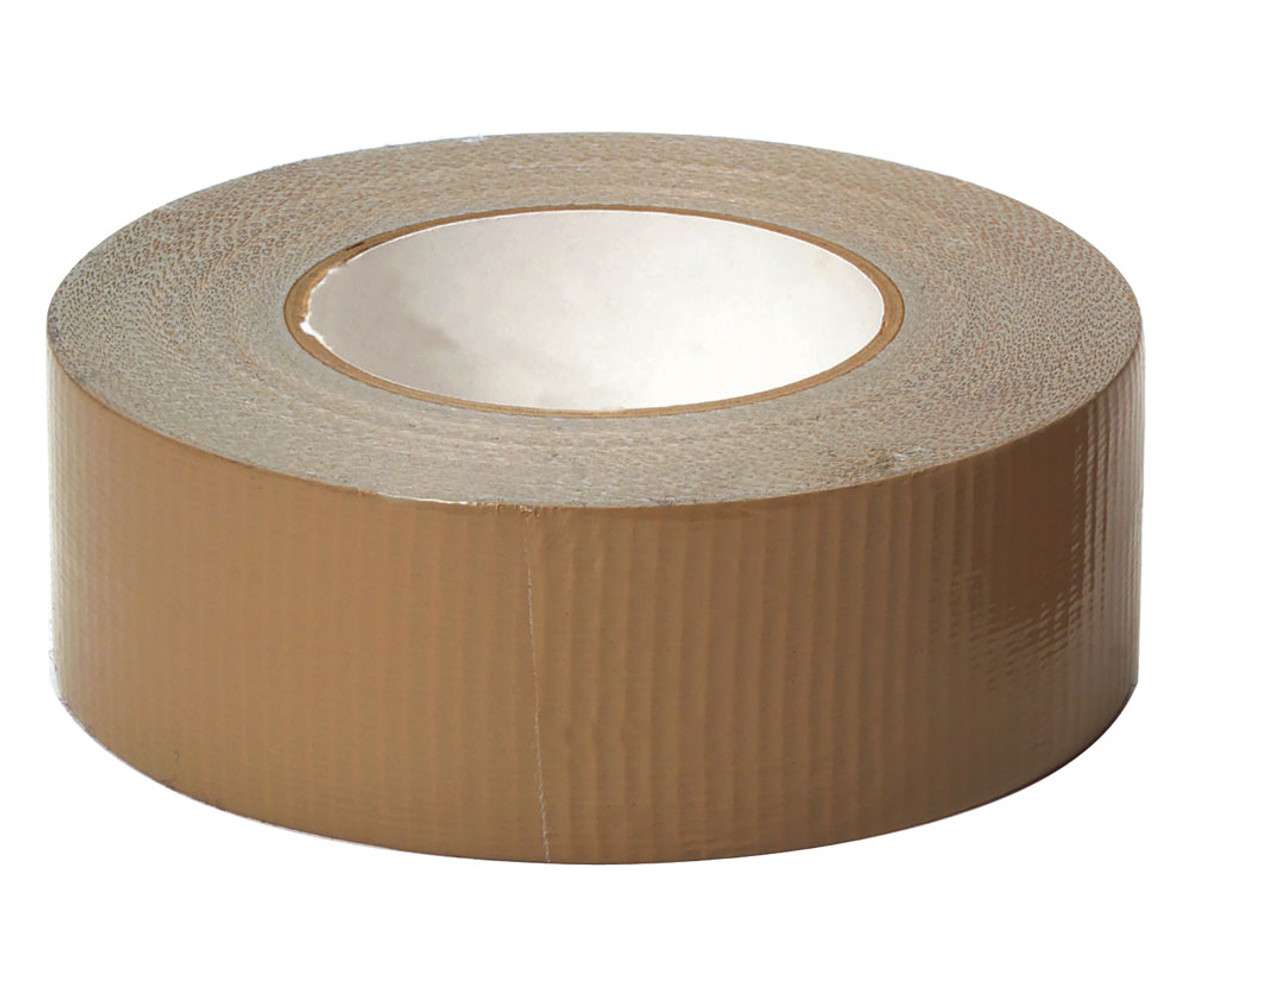 Shop Military Coyote Brown Duct Tape - Fatigues Army Navy Gear